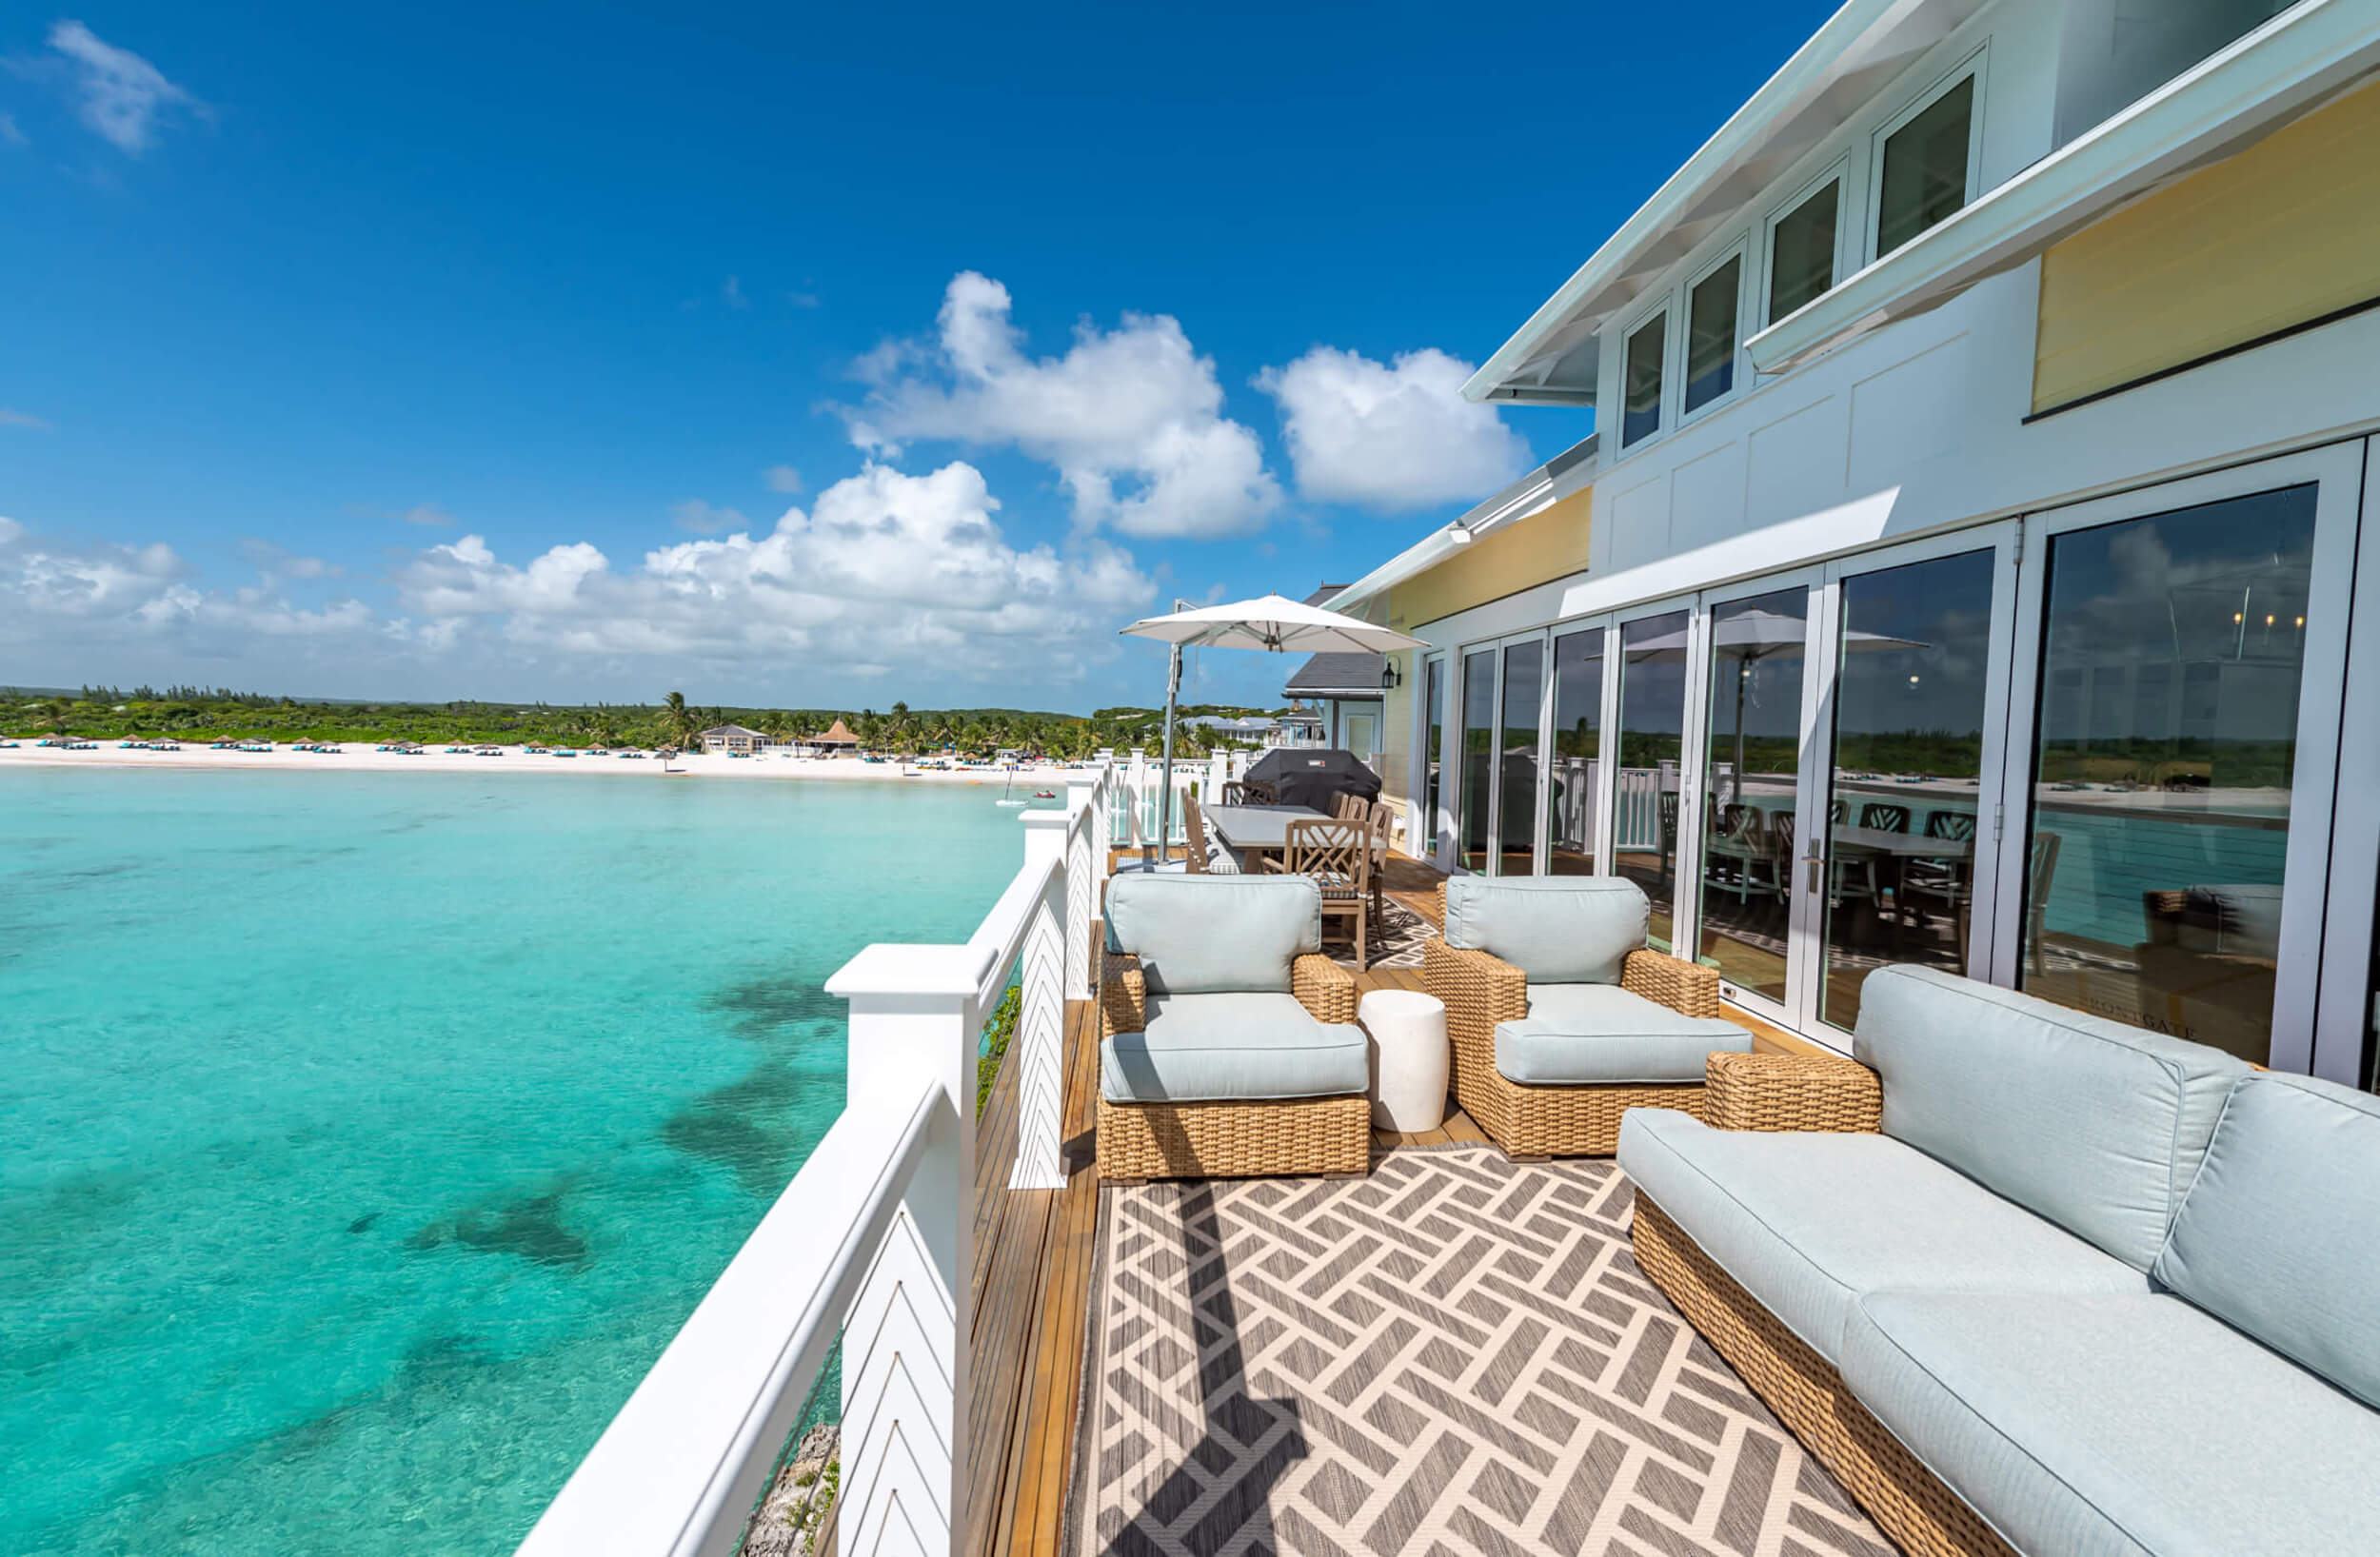 Balcony of a house in the Bahamas at The Abaco Club